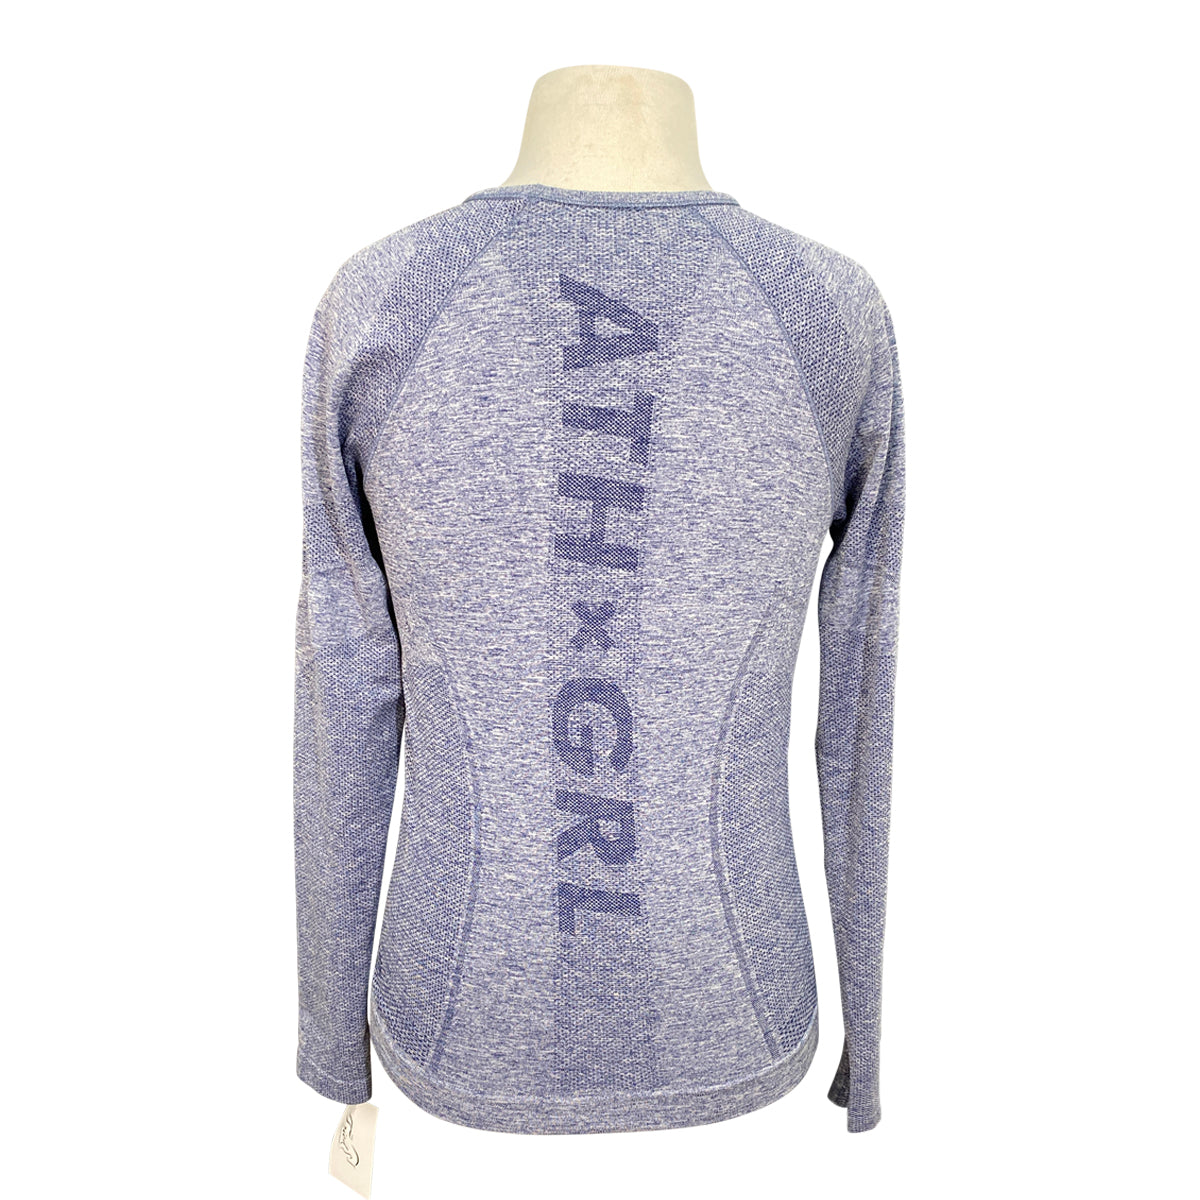 Compression Long Sleeve Shirt in Navy Heather